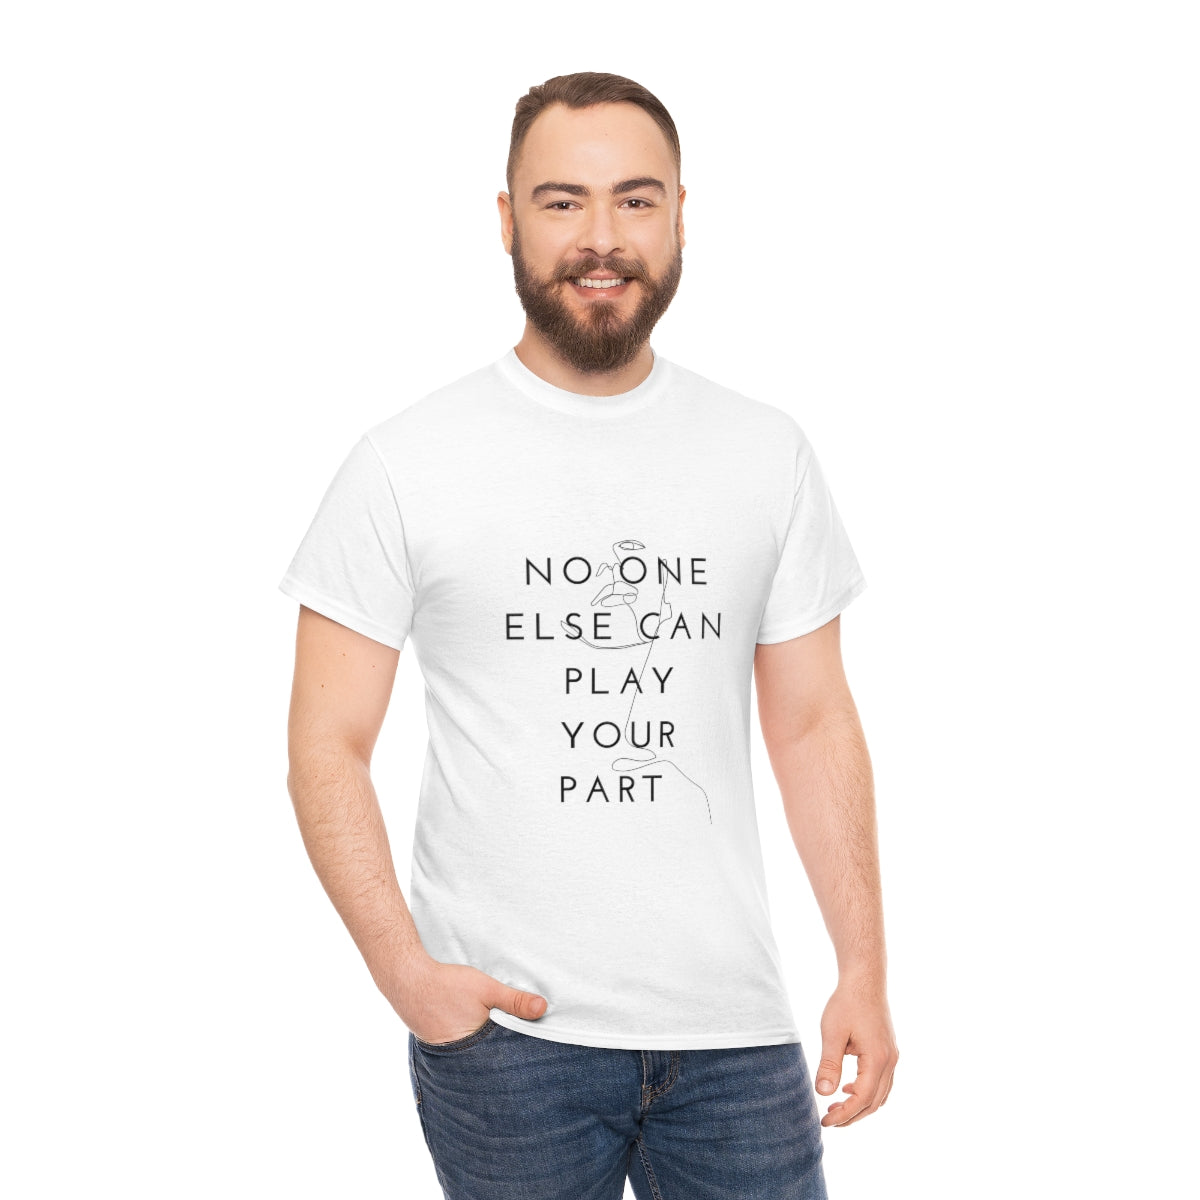 No one else can play your part Tee